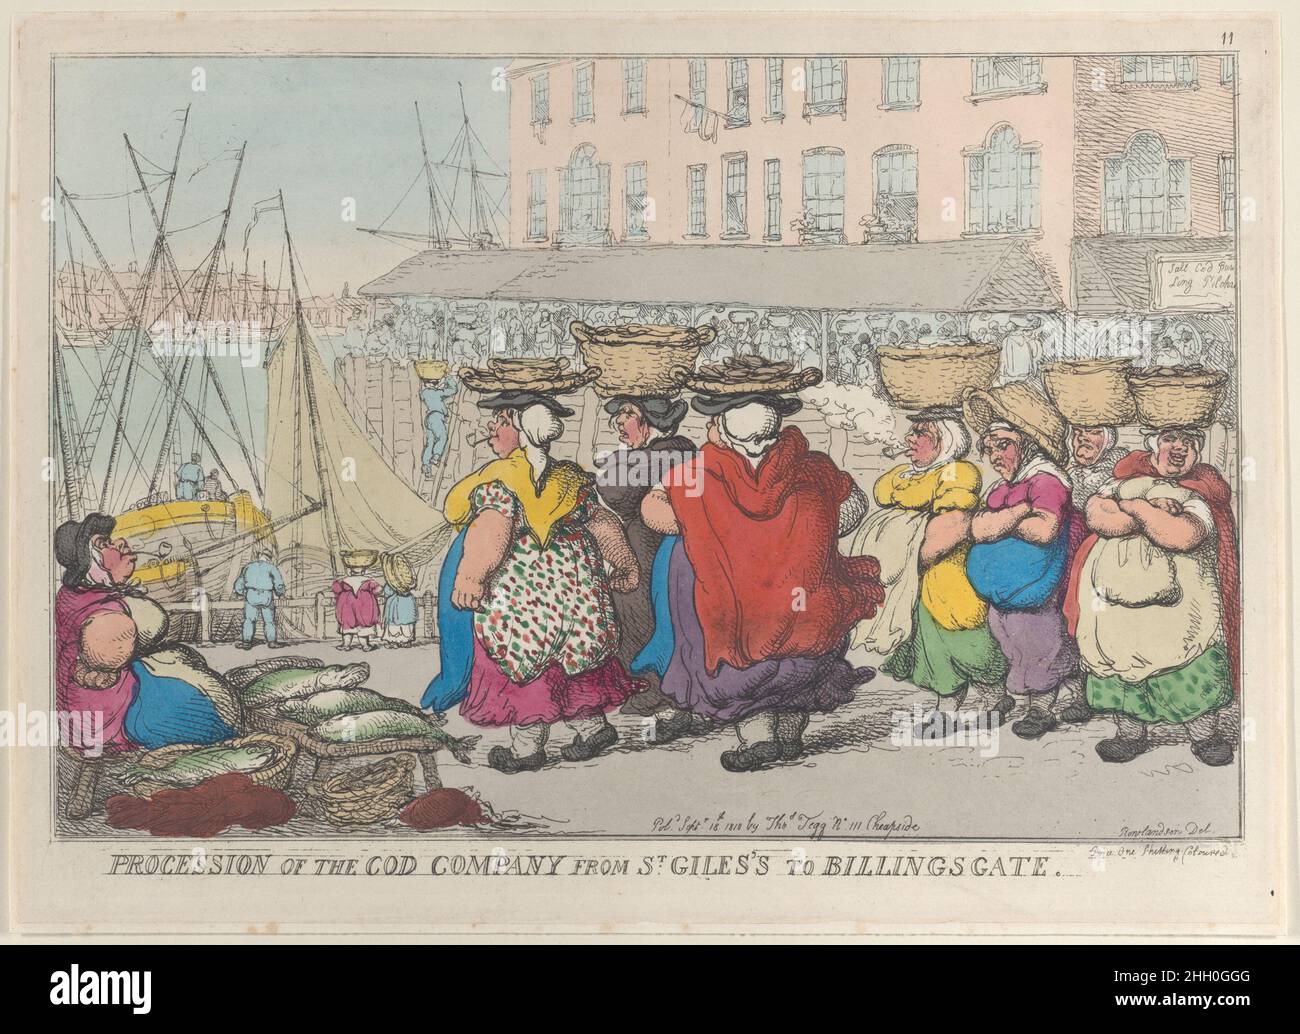 Procession of the Cod Company from St. Giles's to Billingsgate September 18, 1810 Thomas Rowlandson Seven hefty women approach a pier with baskets on their heads, two of them smoking pipes. An eighth woman sits at left, also smoking a pipe, with baskets of cod and lobsters next to her.. Procession of the Cod Company from St. Giles's to Billingsgate. Thomas Rowlandson (British, London 1757–1827 London). September 18, 1810. Hand-colored etching. Thomas Tegg (British, 1776–1846). Prints Stock Photo